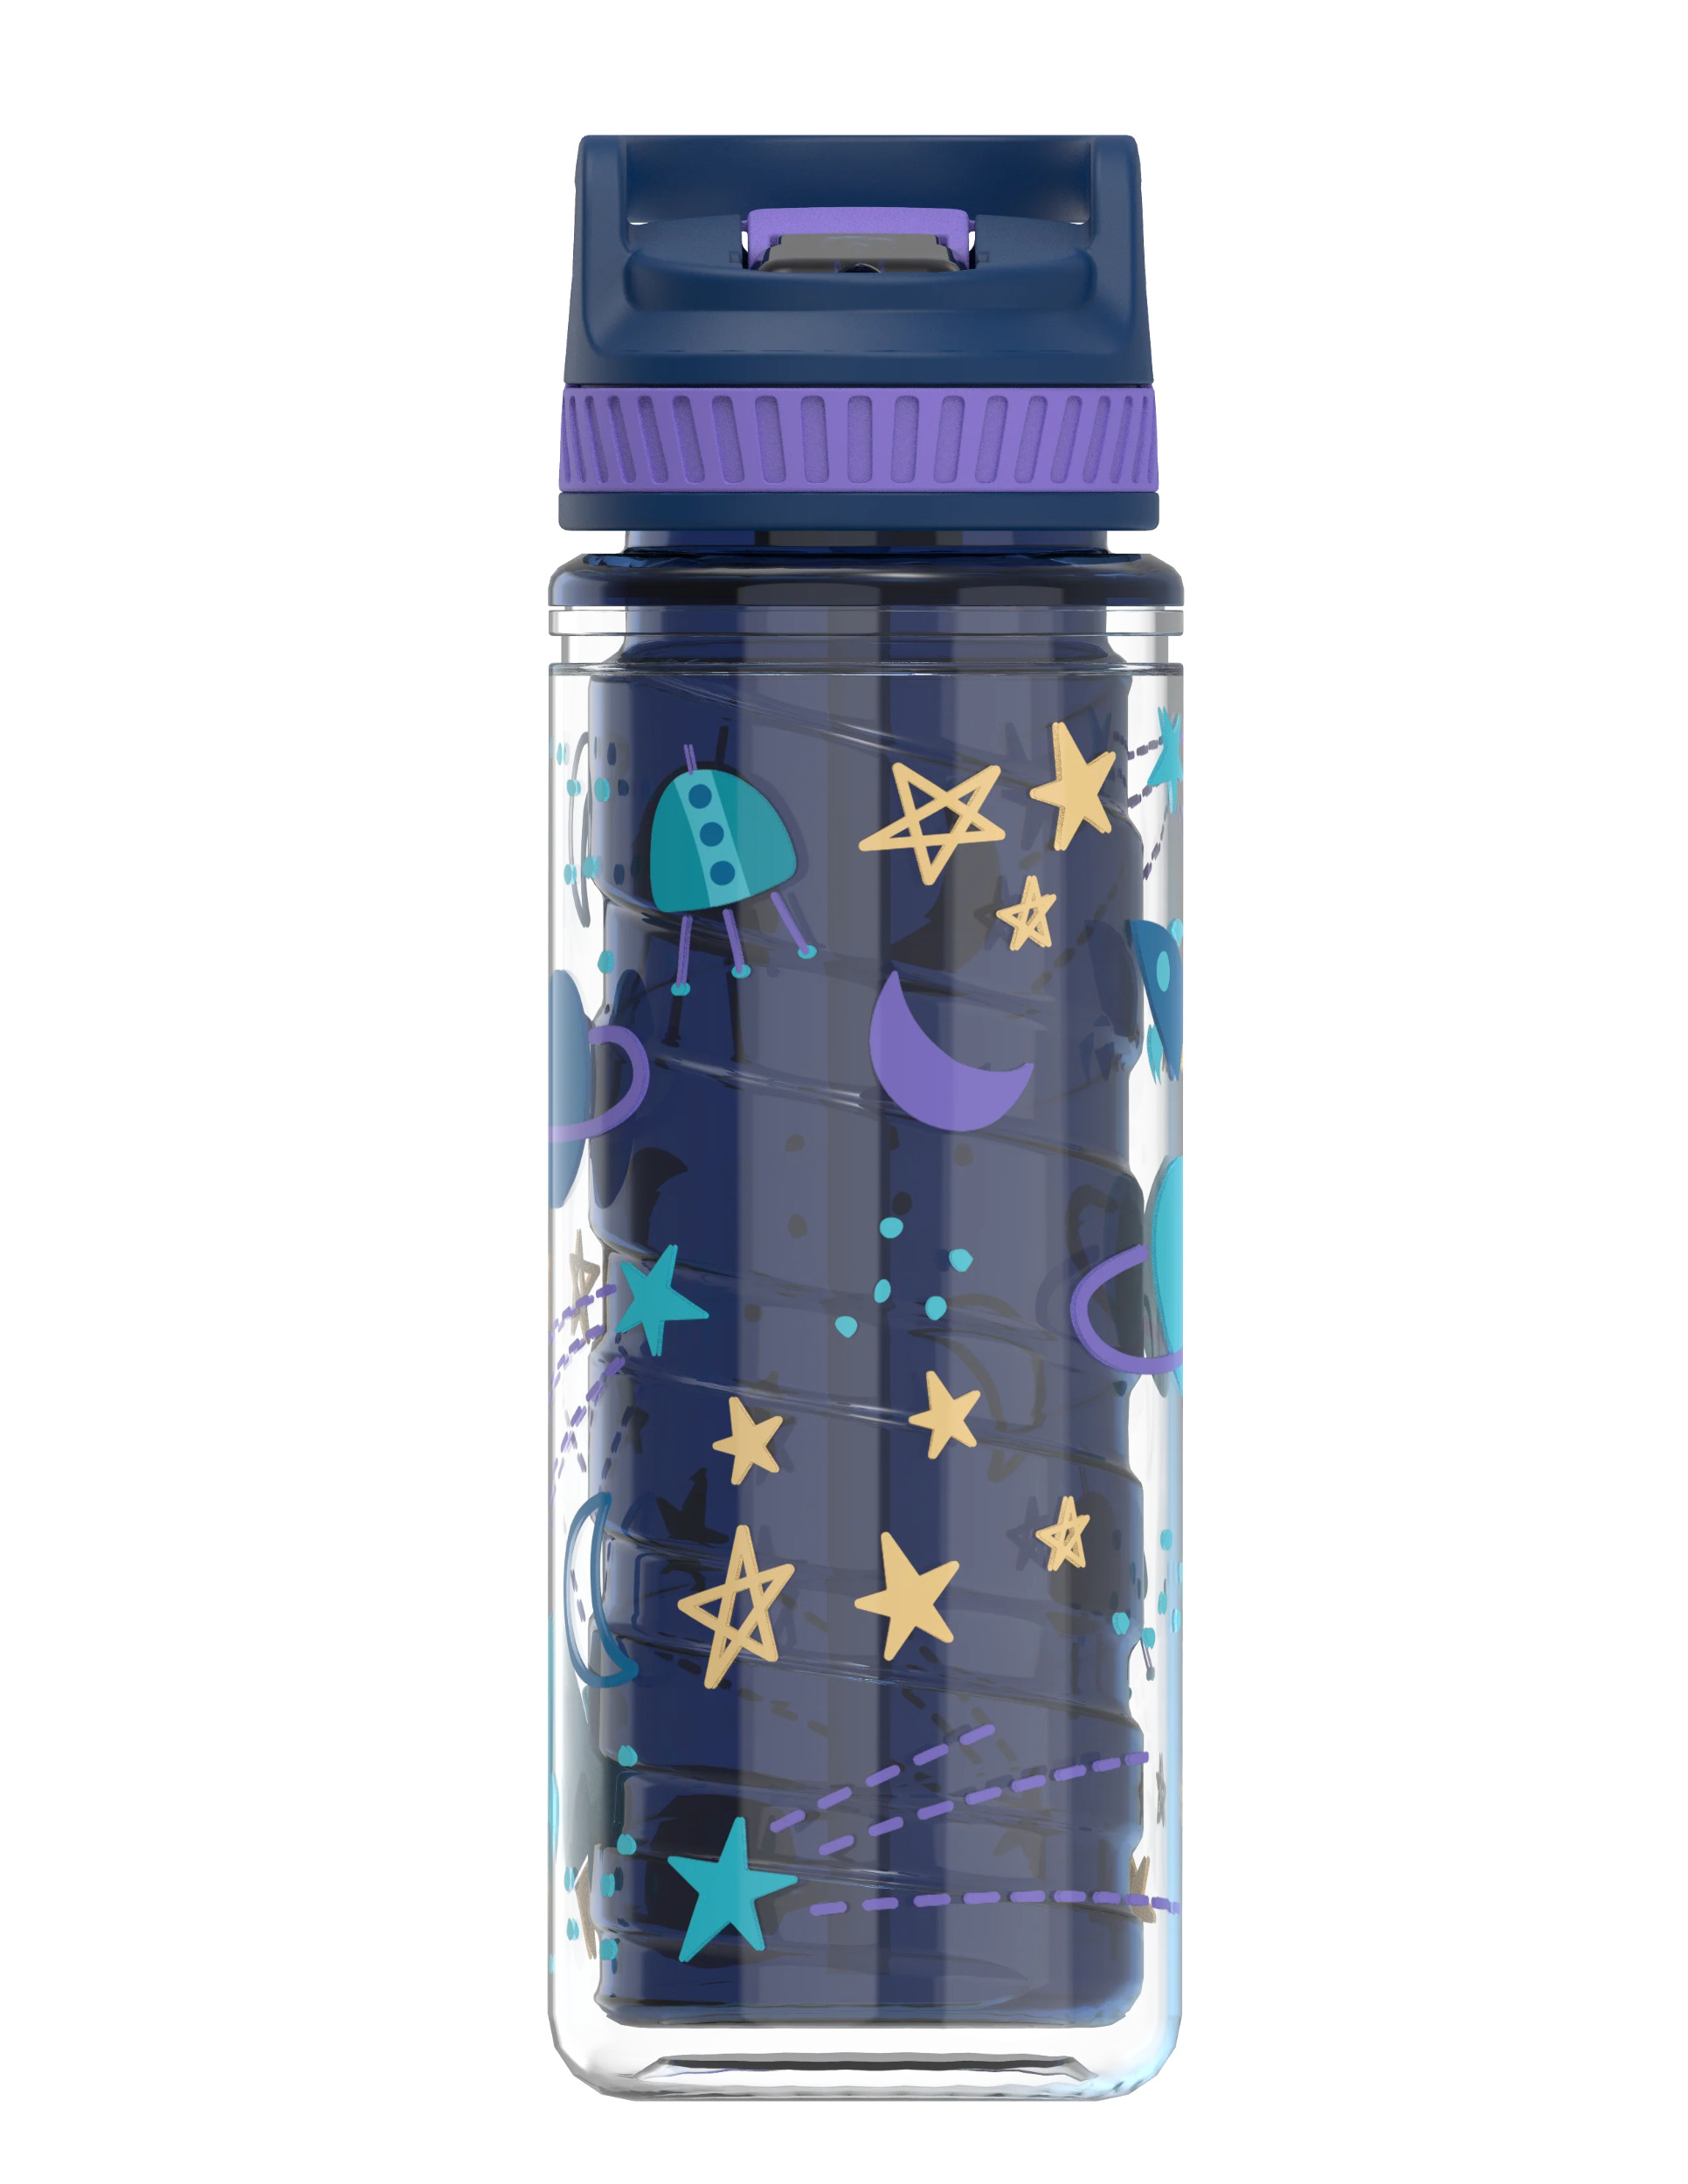 Cool Gear 2-Pack 16 oz Kid's Twist Water Bottle with Double Wall, Sipper Lid and Finger Loop Cap with Printed Design | Great for School, Sports, Outdoors, and More - Cellestial/ Sea Life - image 2 of 3